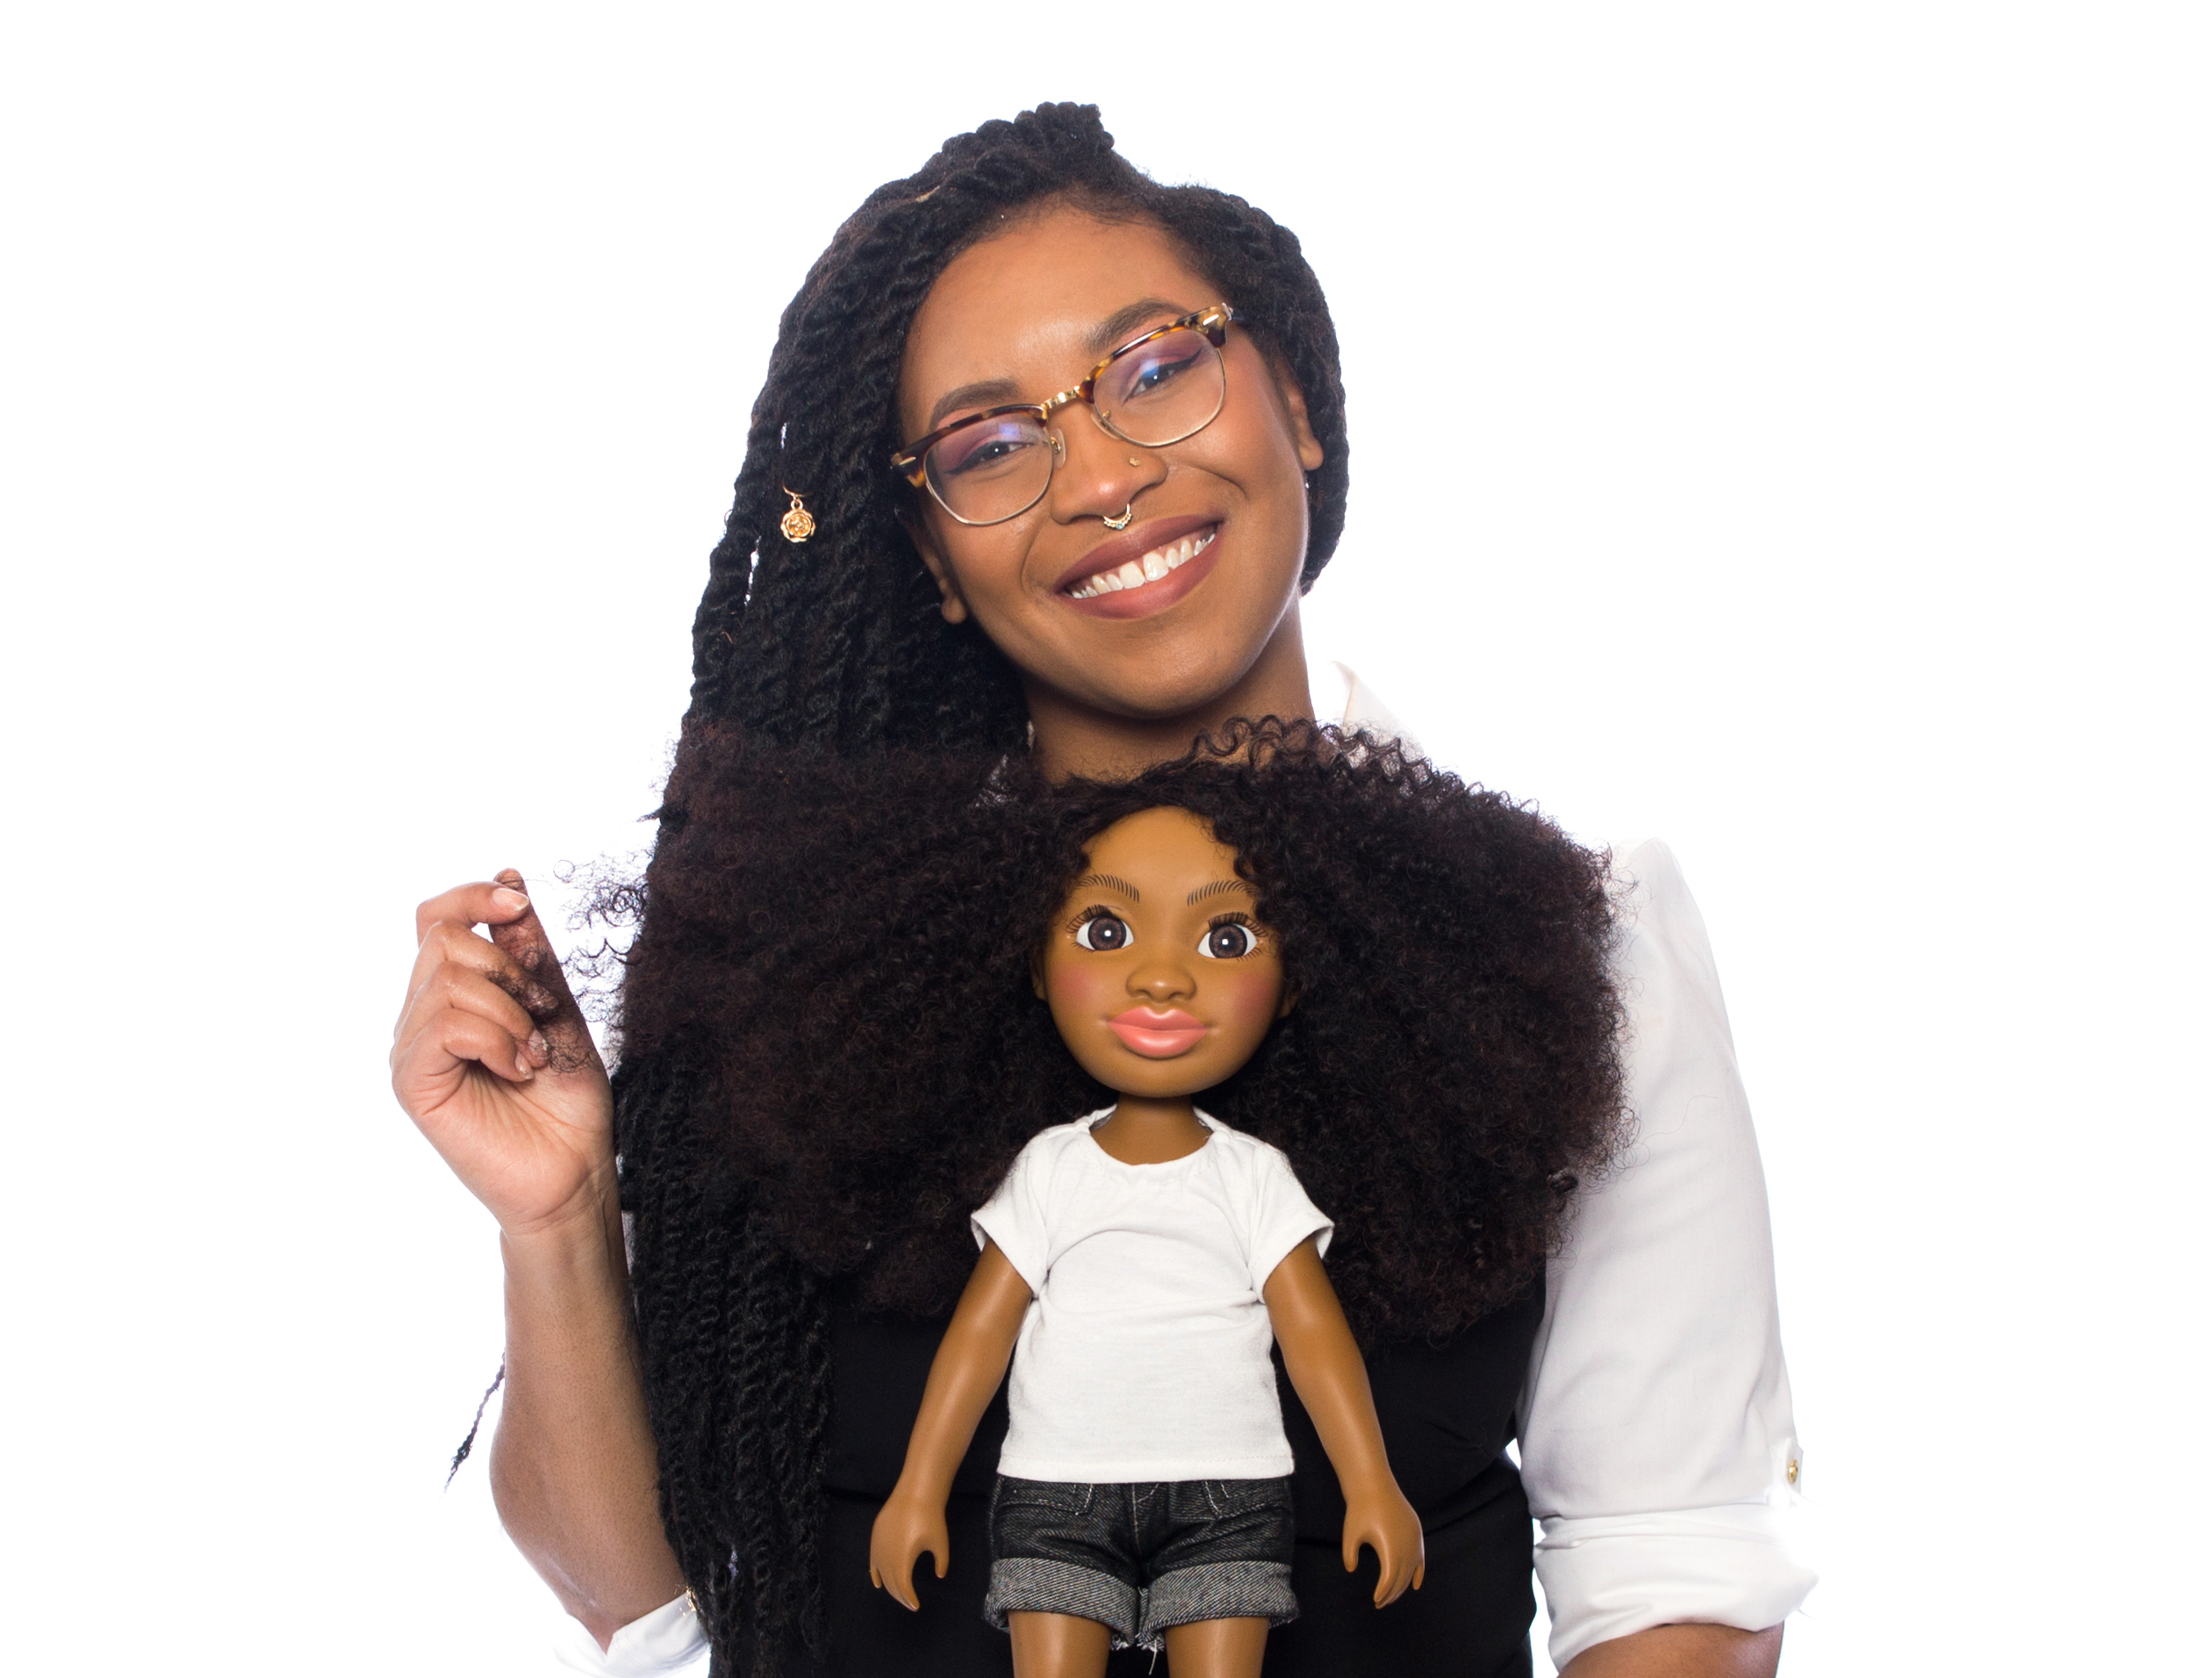 This Startup Makes Dolls That Empower Kids To Love Themselves The Way They Are